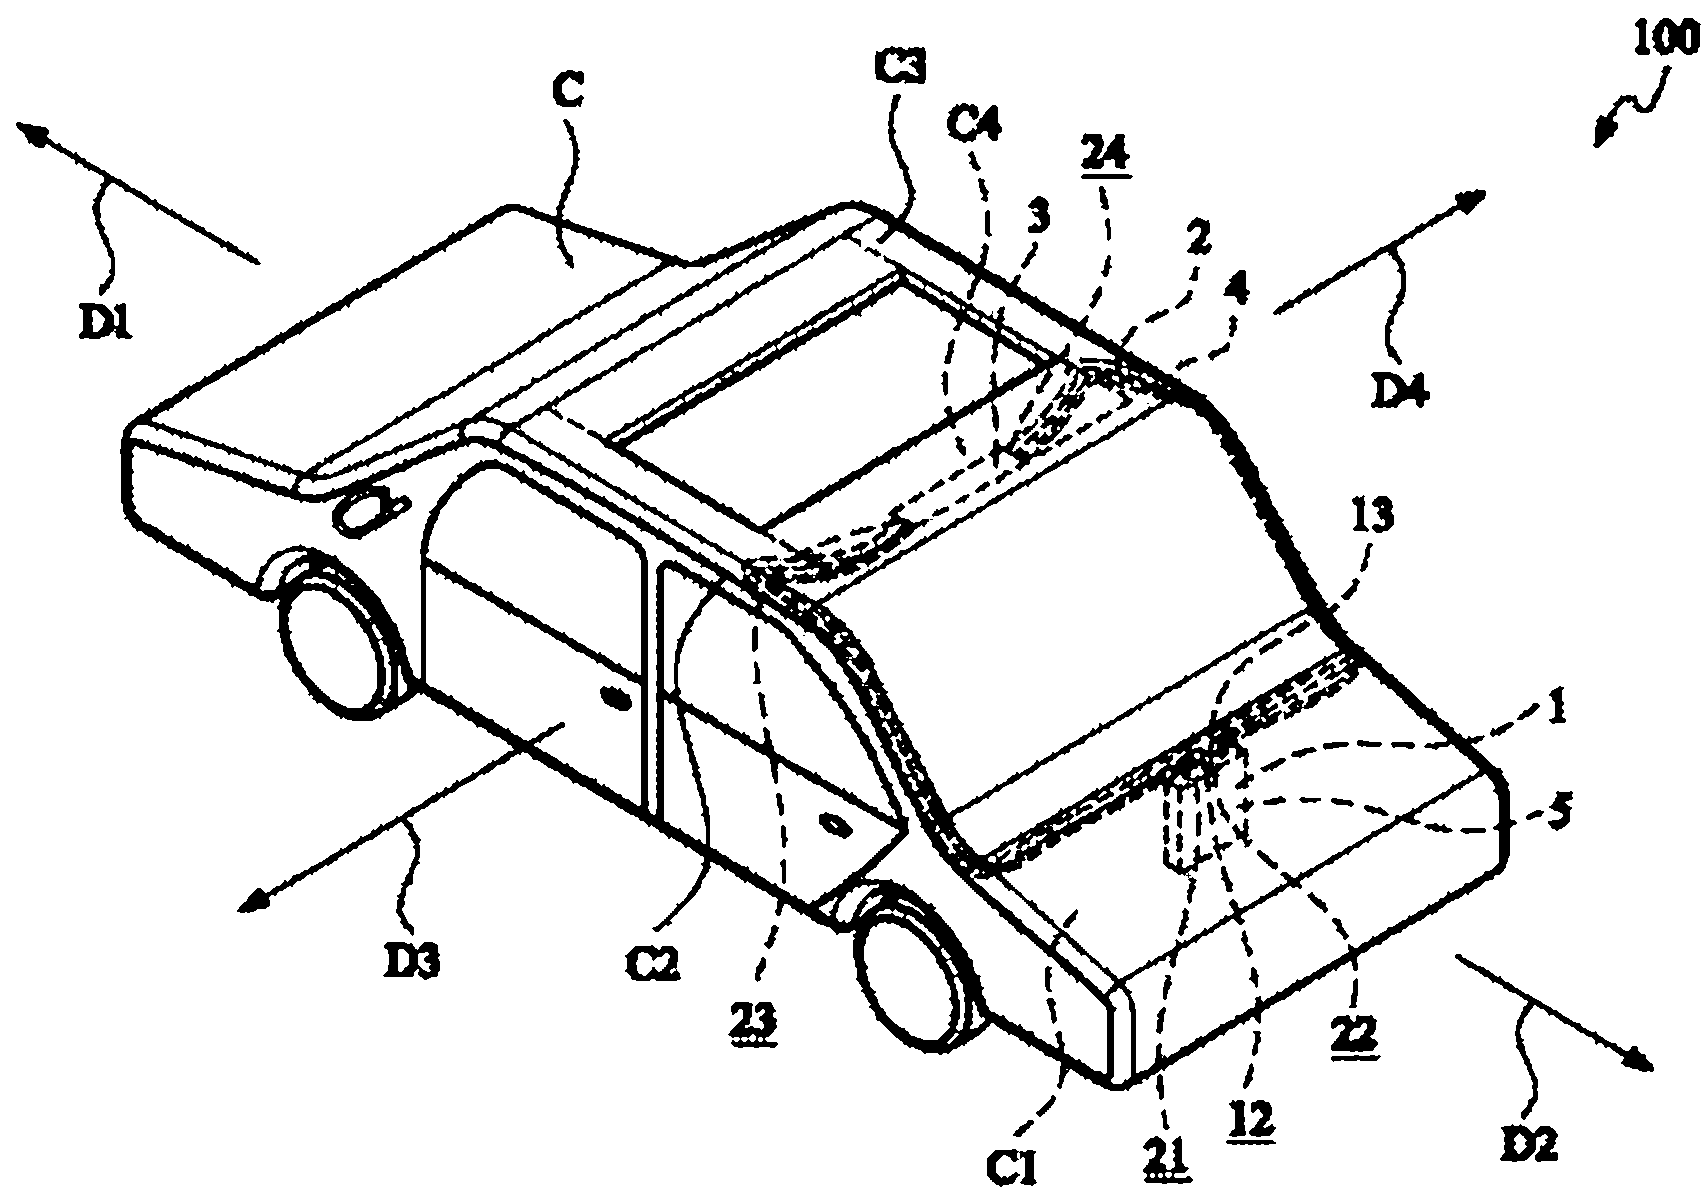 Car cover device